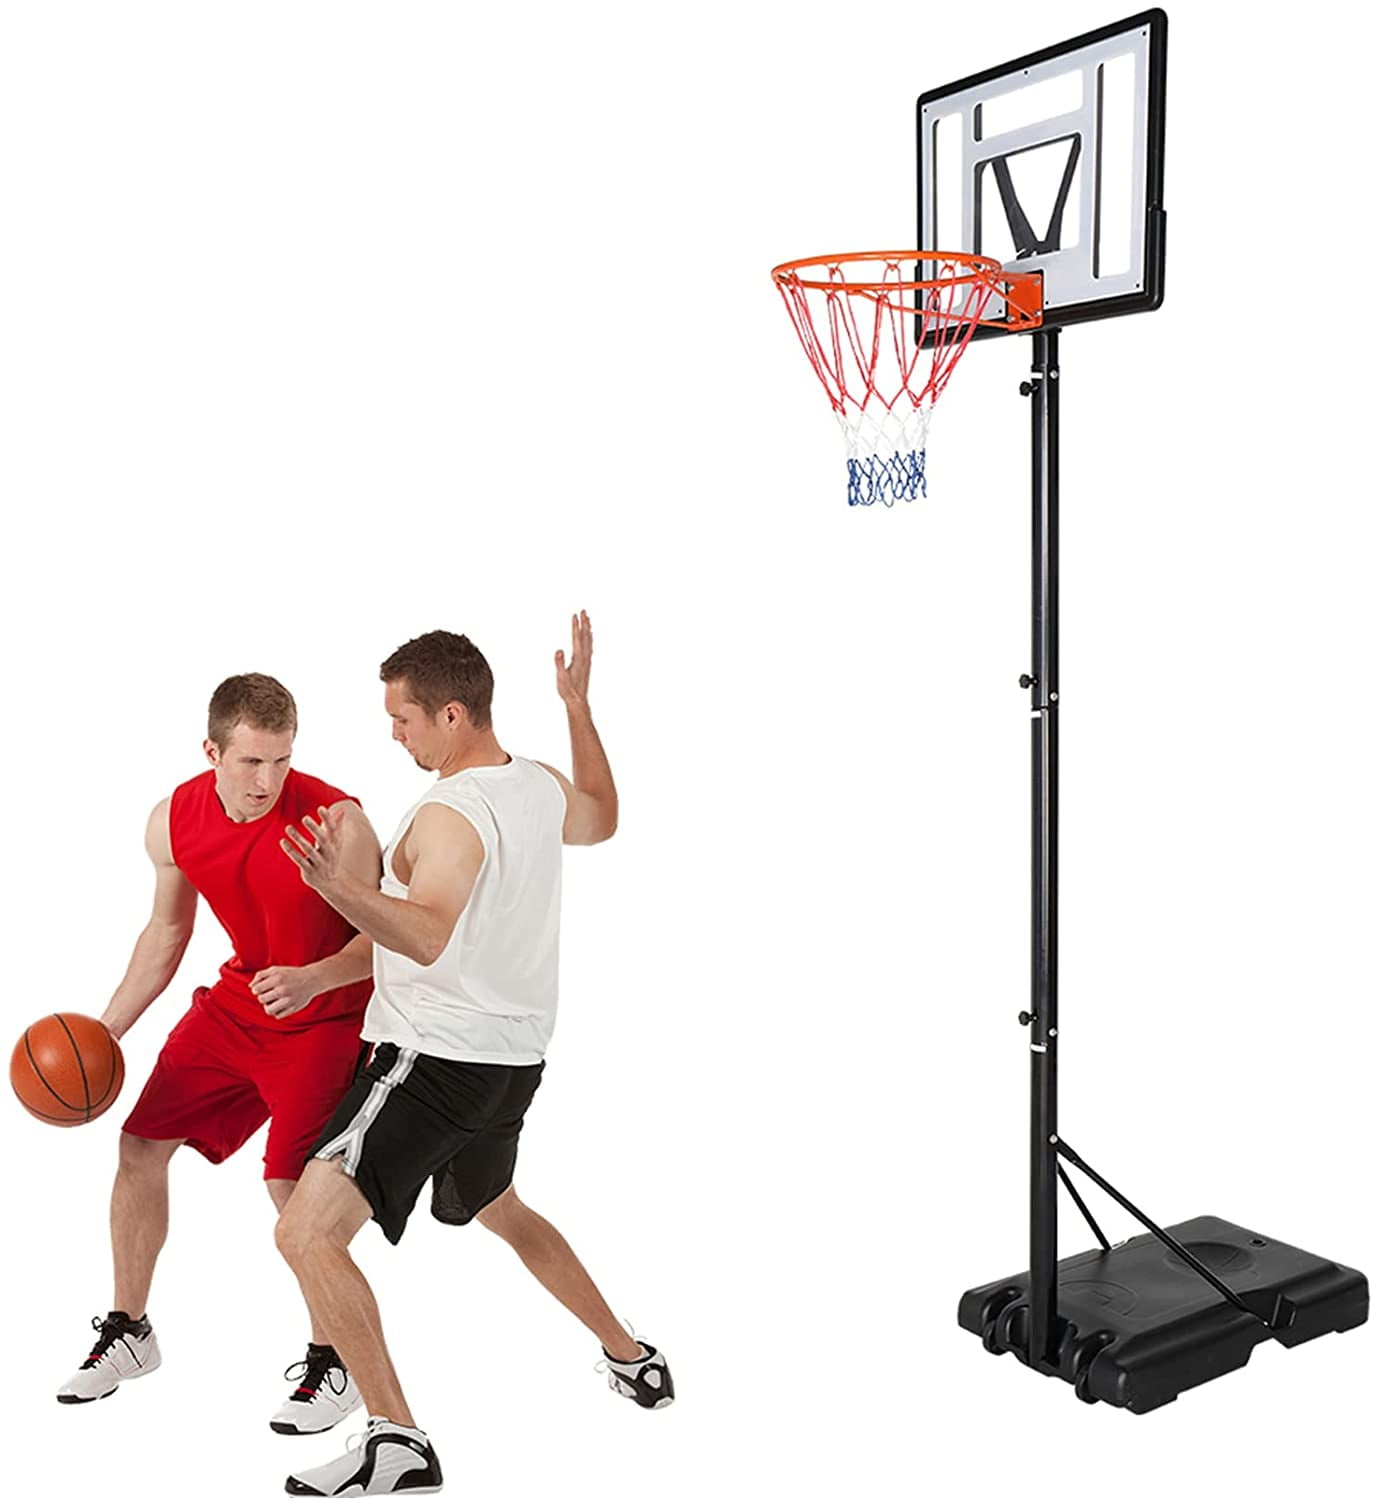 Enlitoys Basketball Hoop Set for Toddler Stand Adjustable Height Mini Indoors Outdoors Basketball Goal Toy Game Play Sport with Ball and Pump for Kids 